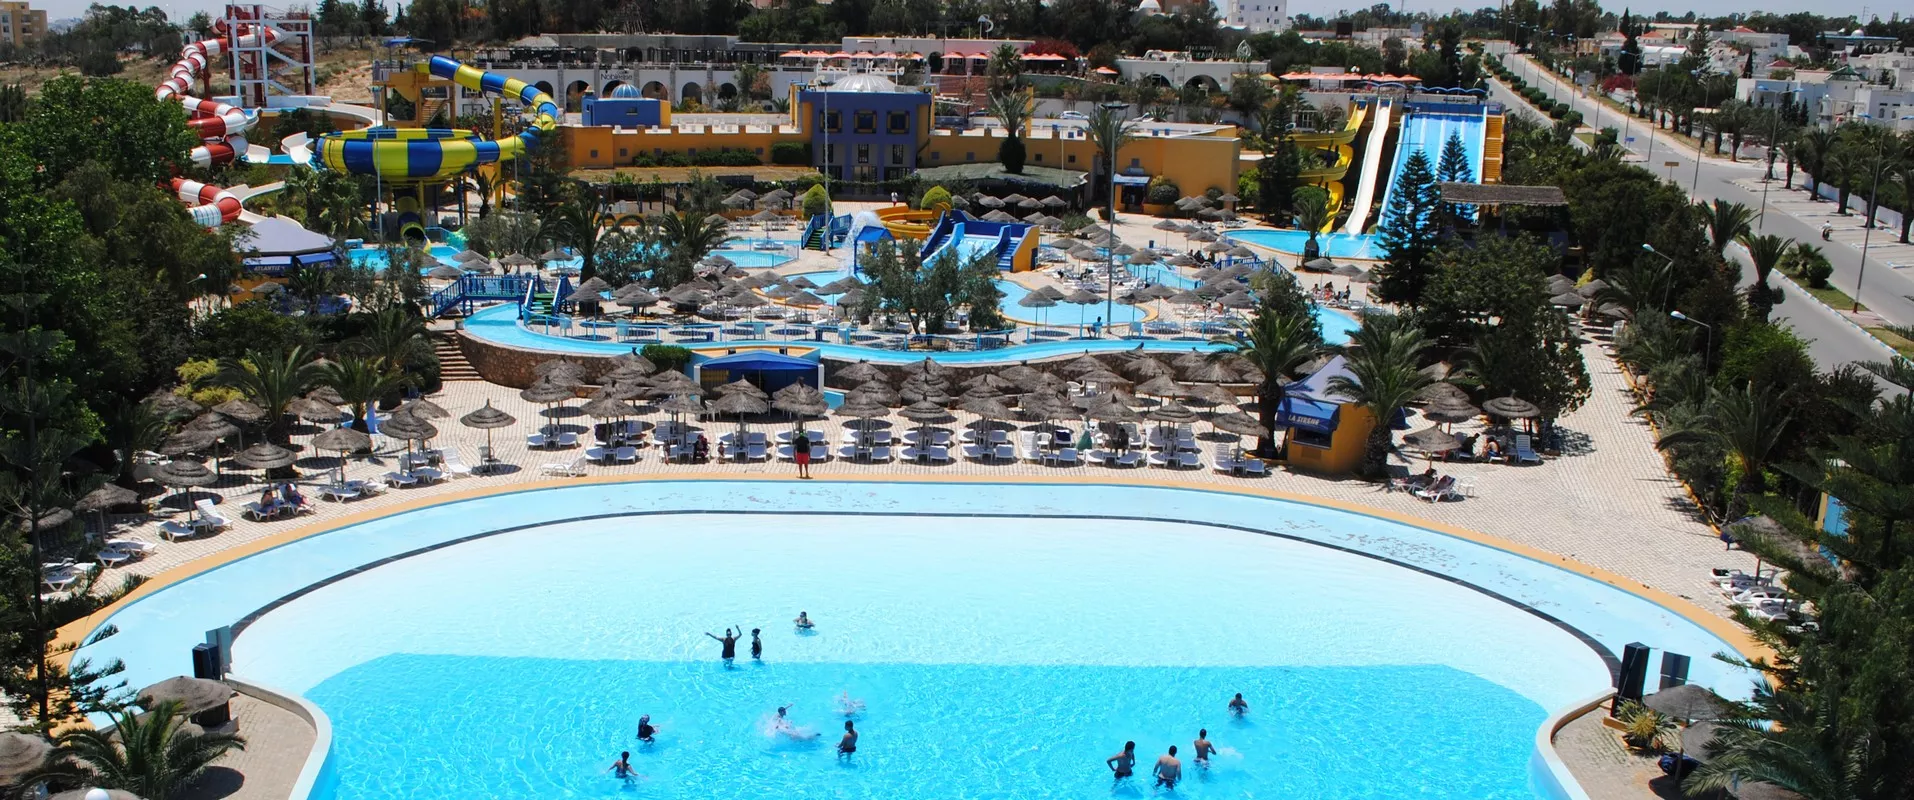 Acqua Palace in Tunisia, Africa | Water Parks - Rated 3.2